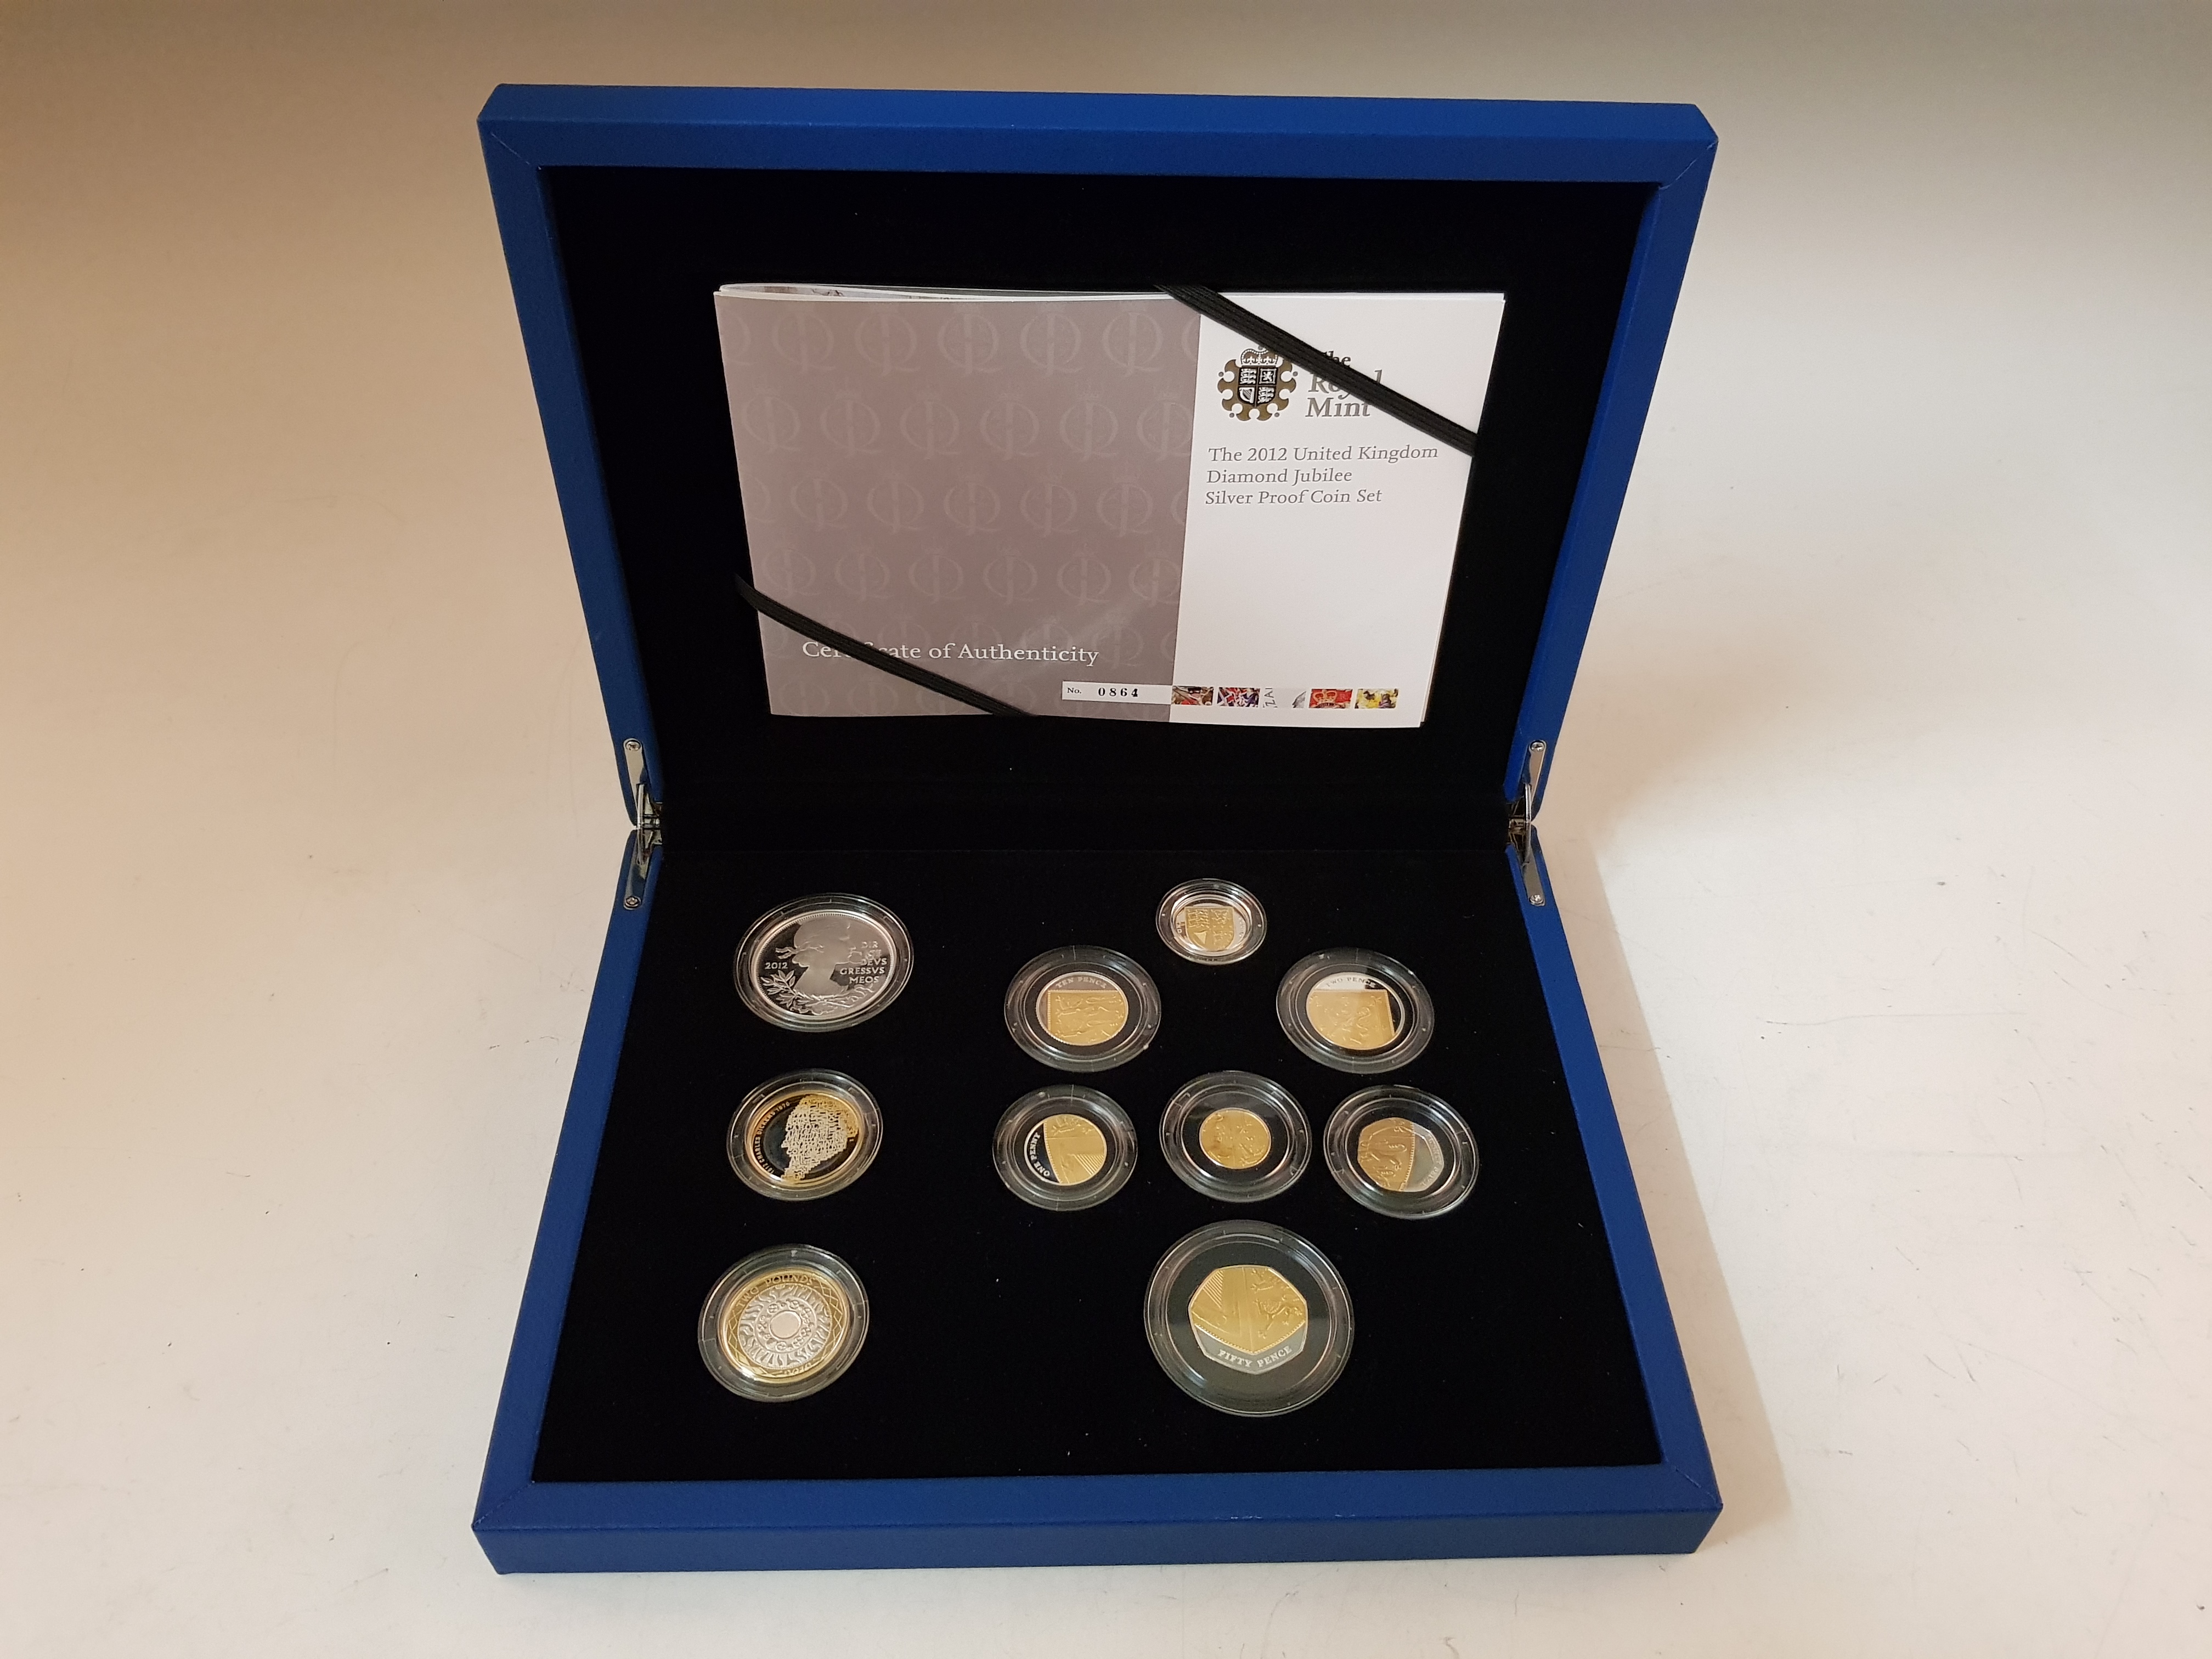 A Royal Mint 2012 Diamond Jubilee silver proof coin set of 10 coins in box.